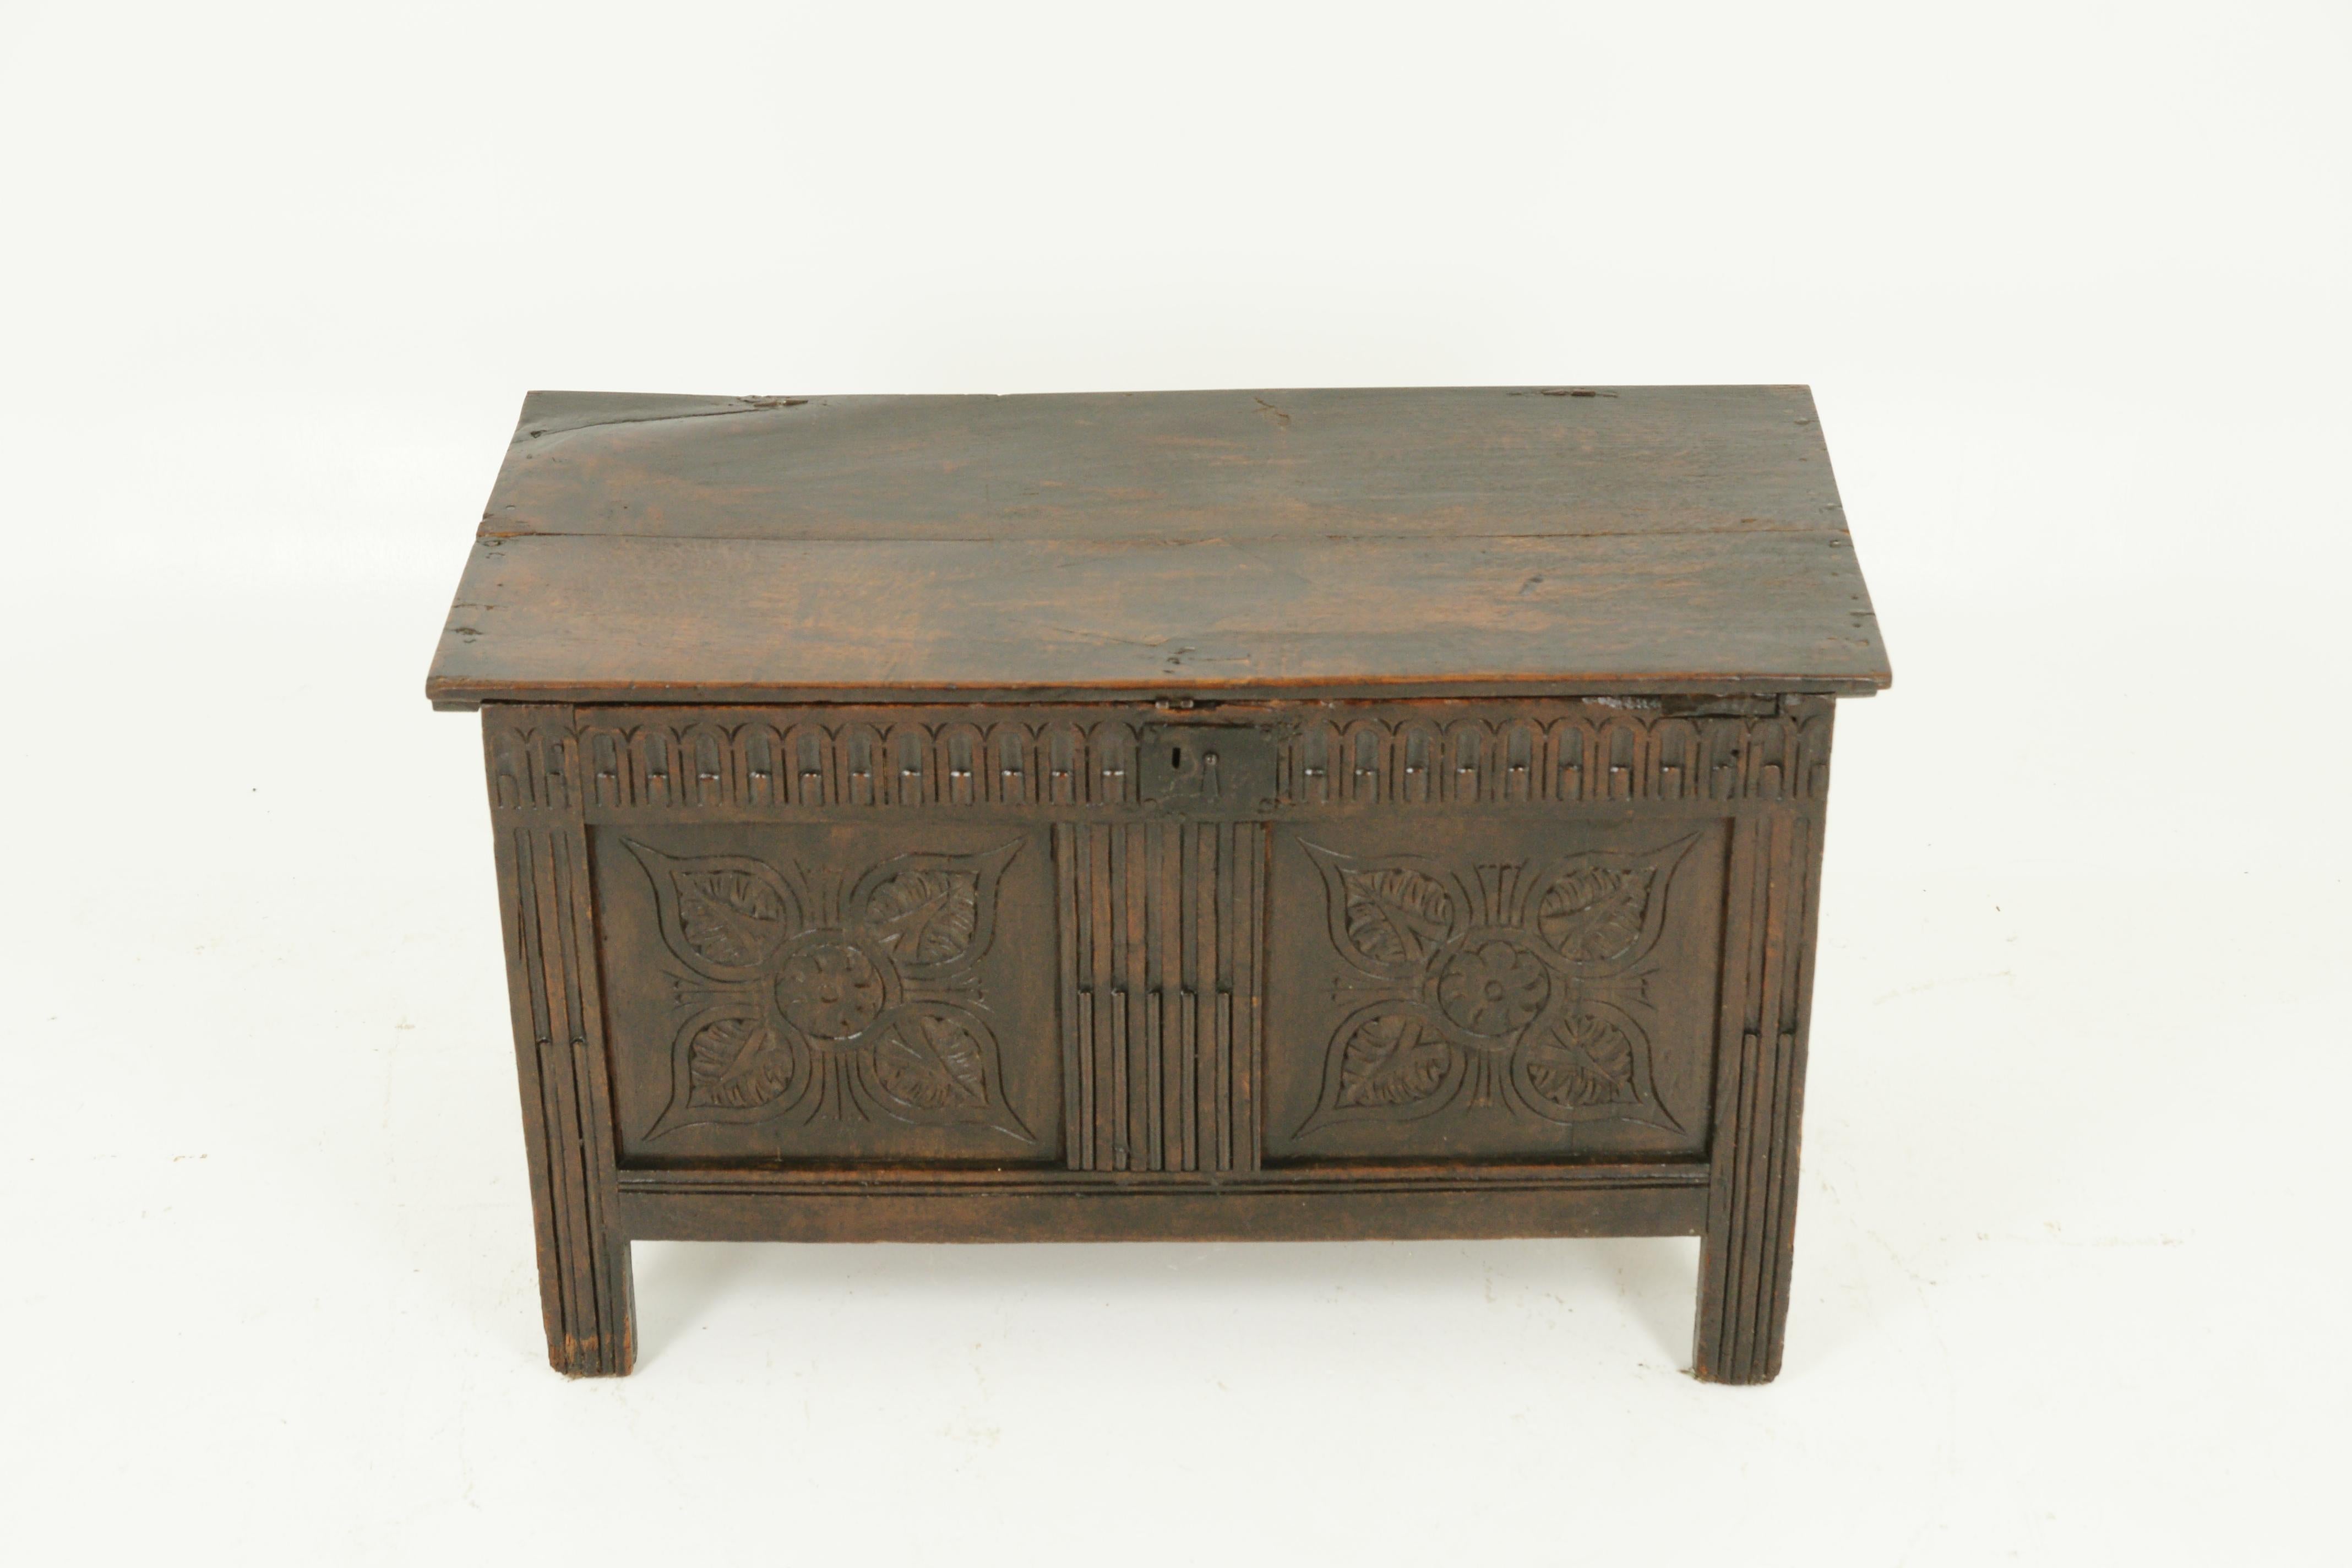 Antique oak coffer, blanket box, carved oak, Scotland 1780, Antique Furniture, B1495

Scotland 1780
Solid oak original top
Hinged top
Pair of carved panels on the front
Paneled sides
Standing on stile feet
Lots of age and wear
Solid condition
Some